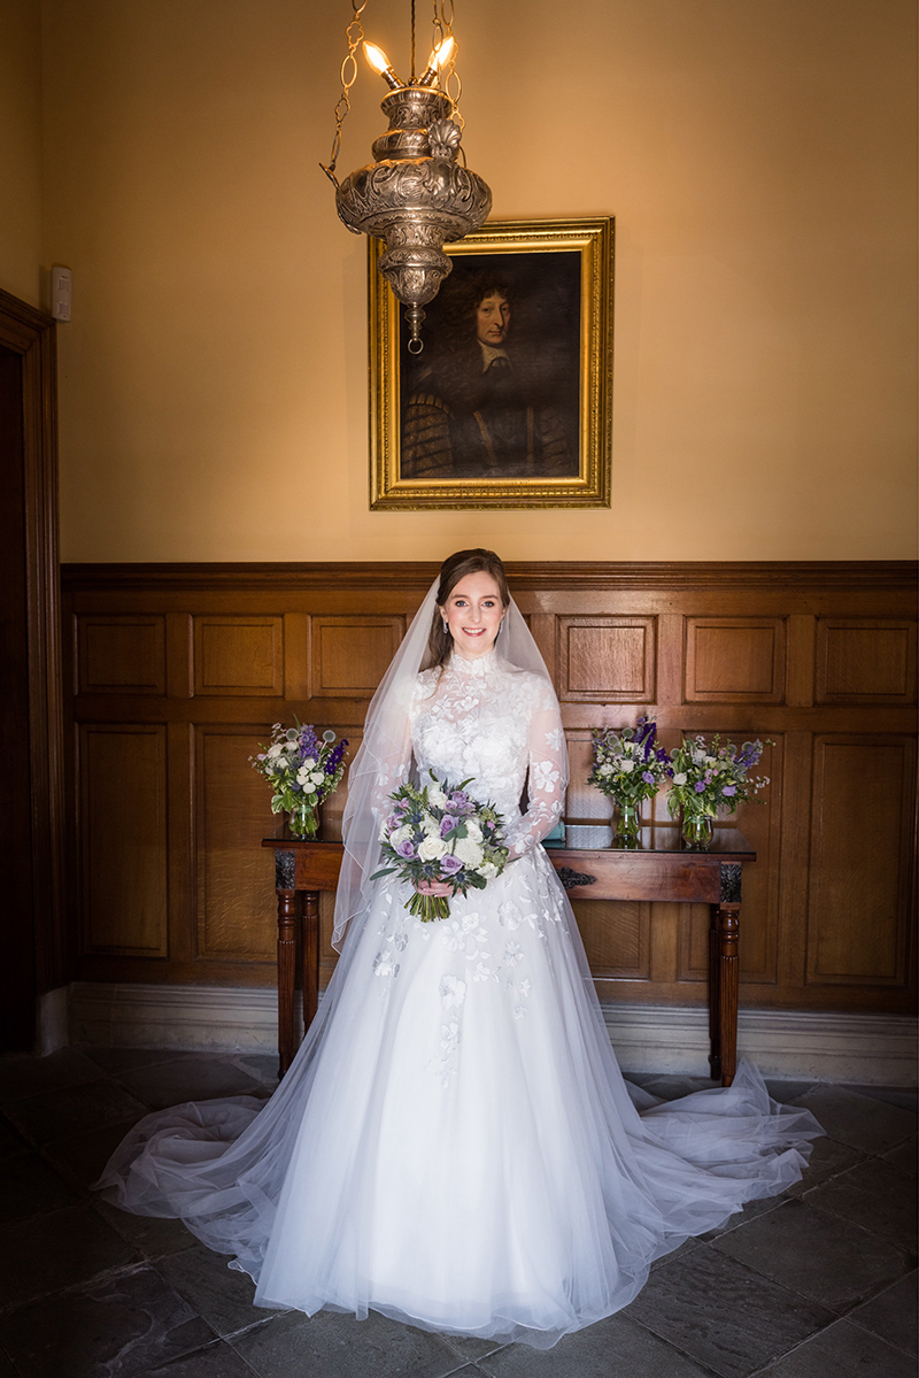 Bride smiles and stands in front of painting in her lace dress and veil holding her bouquet